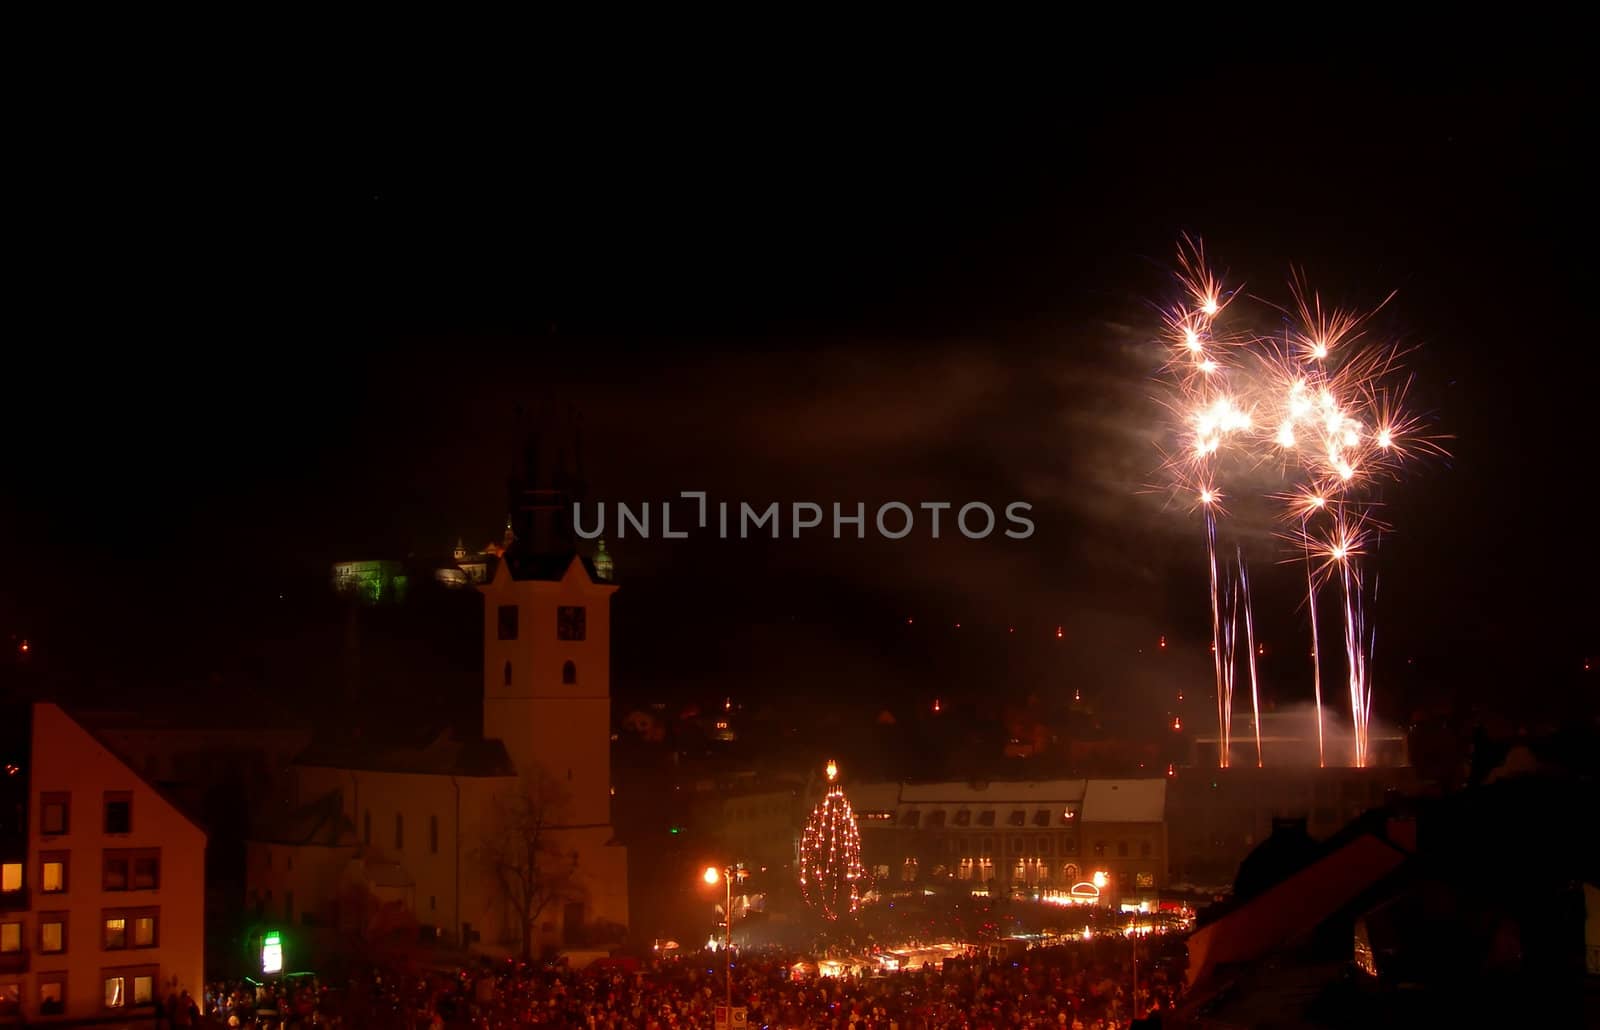    New year celebration with fireworks in the centre of town           